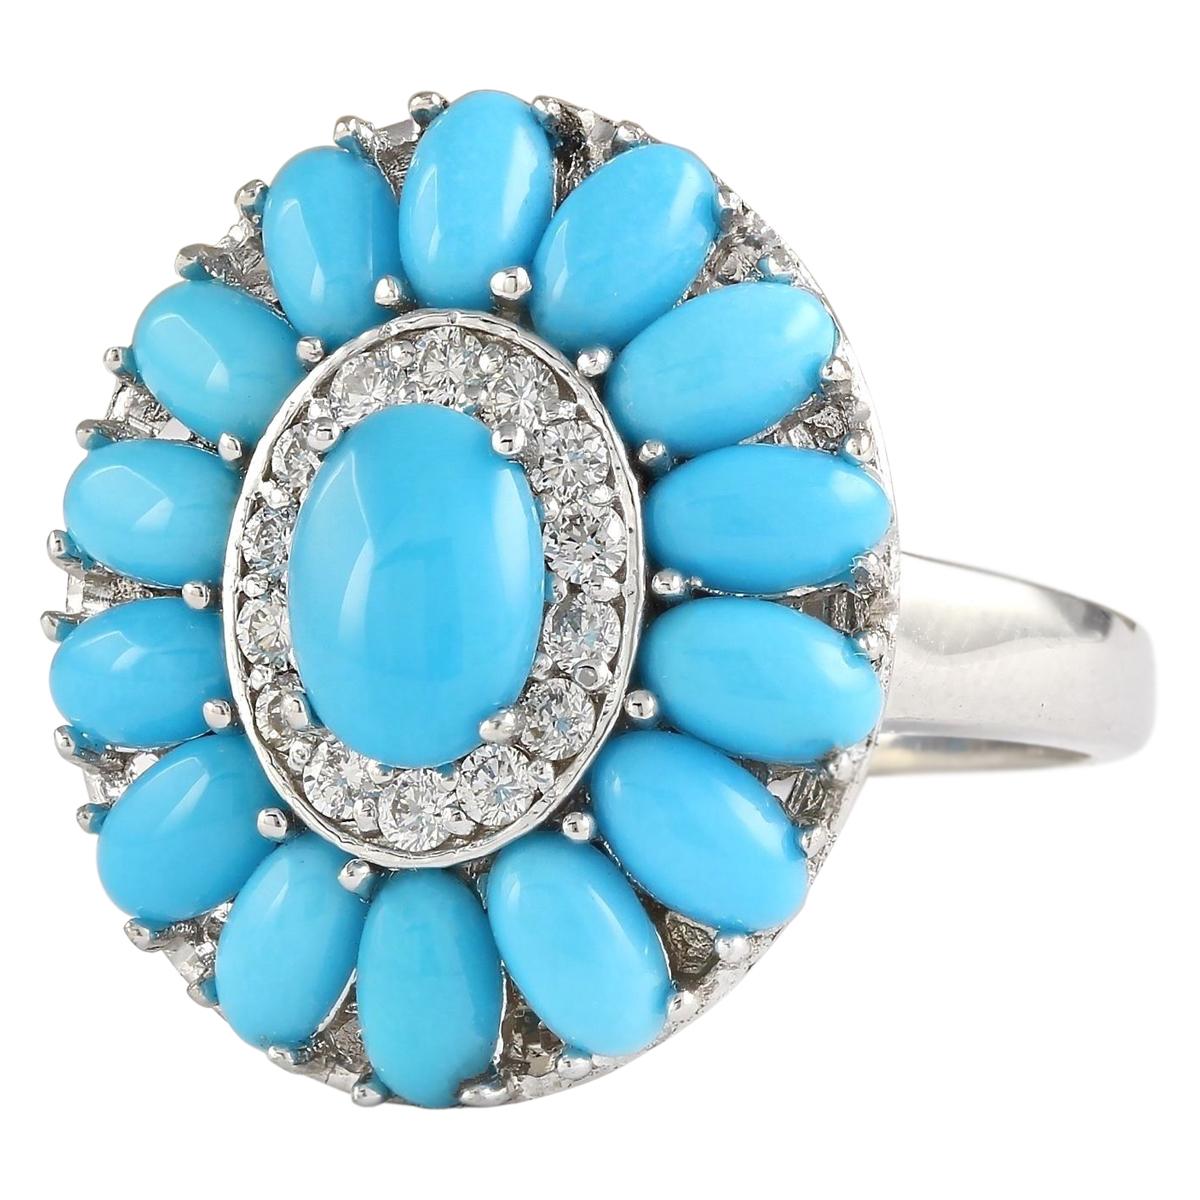 Stamped: 14K White Gold
Total Ring Weight: 6.0 Grams
Total Natural Turquoise Weight is 3.38 Carat
Color: Blue
Total Natural Diamond Weight is 0.25 Carat
Color: F-G, Clarity: VS2-SI1
Face Measures: 20.20x17.45 mm
Sku: [703802W]